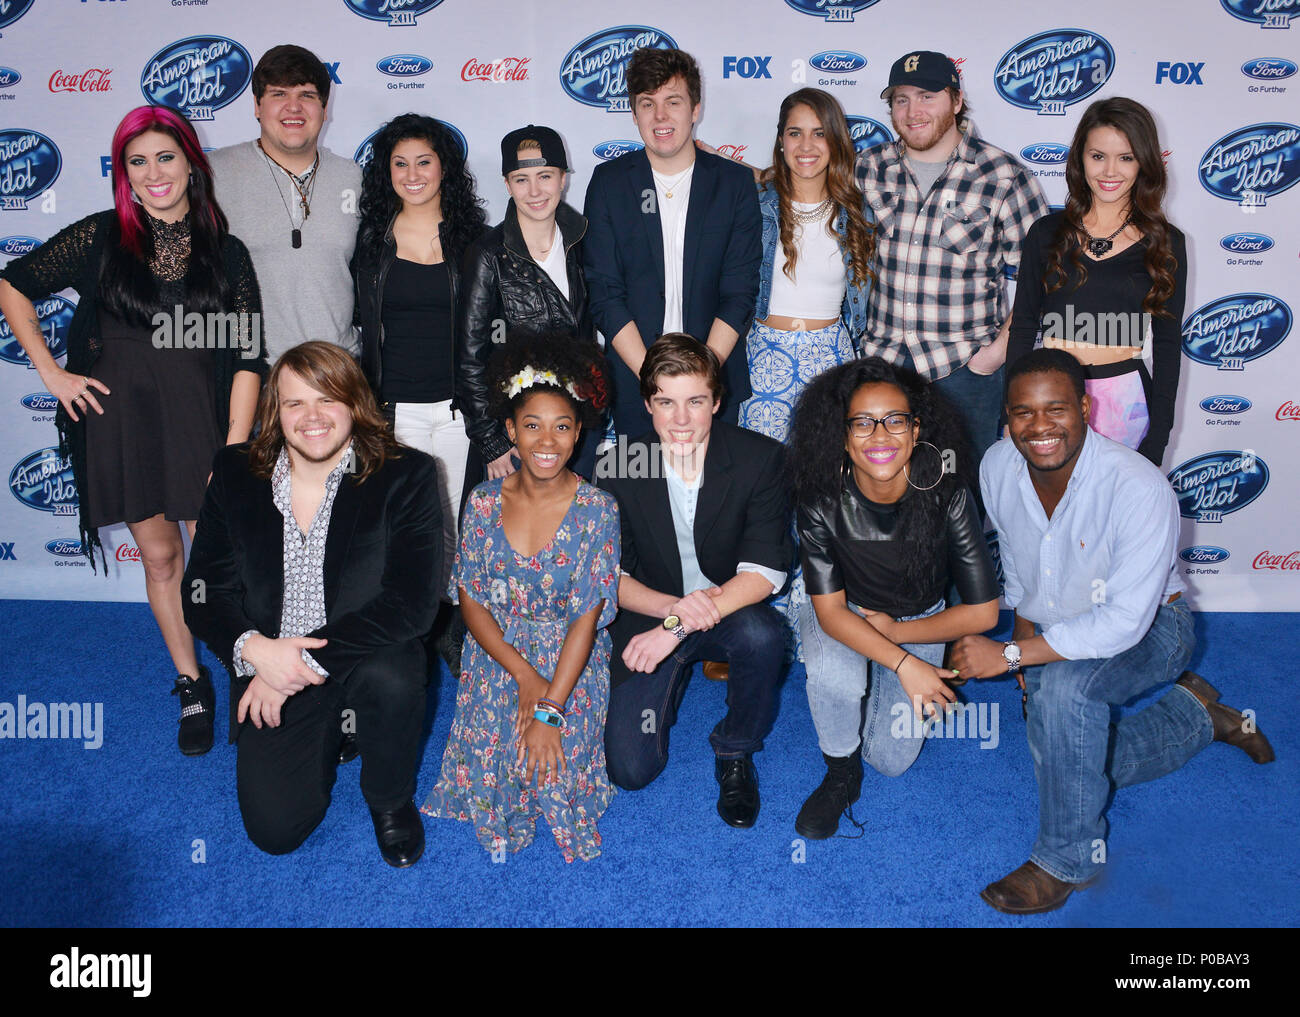 ZD8 8458 at the American Idol X!!! Finalists Party-2014 at the Fig & Olive Restaurant in Los Angeles. Finalists Jessica Meuse, Dexter Roberts, Jena Irene, MK Nobilette, Alex Preston, Emily Piriz, Ben Briley, Kristen O'Connor (Bottom L-R) Caleb Johnson, Malaya Watson, Sam Woolf, Majesty Rose and C.J. Harris attends FOX's 'American Idol XIII' finalists party at Fig & Olive Melrose PlaceThirteen Finalists 316  Event in Hollywood Life - California, Red Carpet Event, USA, Film Industry, Celebrities, Photography, Bestof, Arts Culture and Entertainment, Topix Celebrities fashion, Best of, Hollywood L Stock Photo